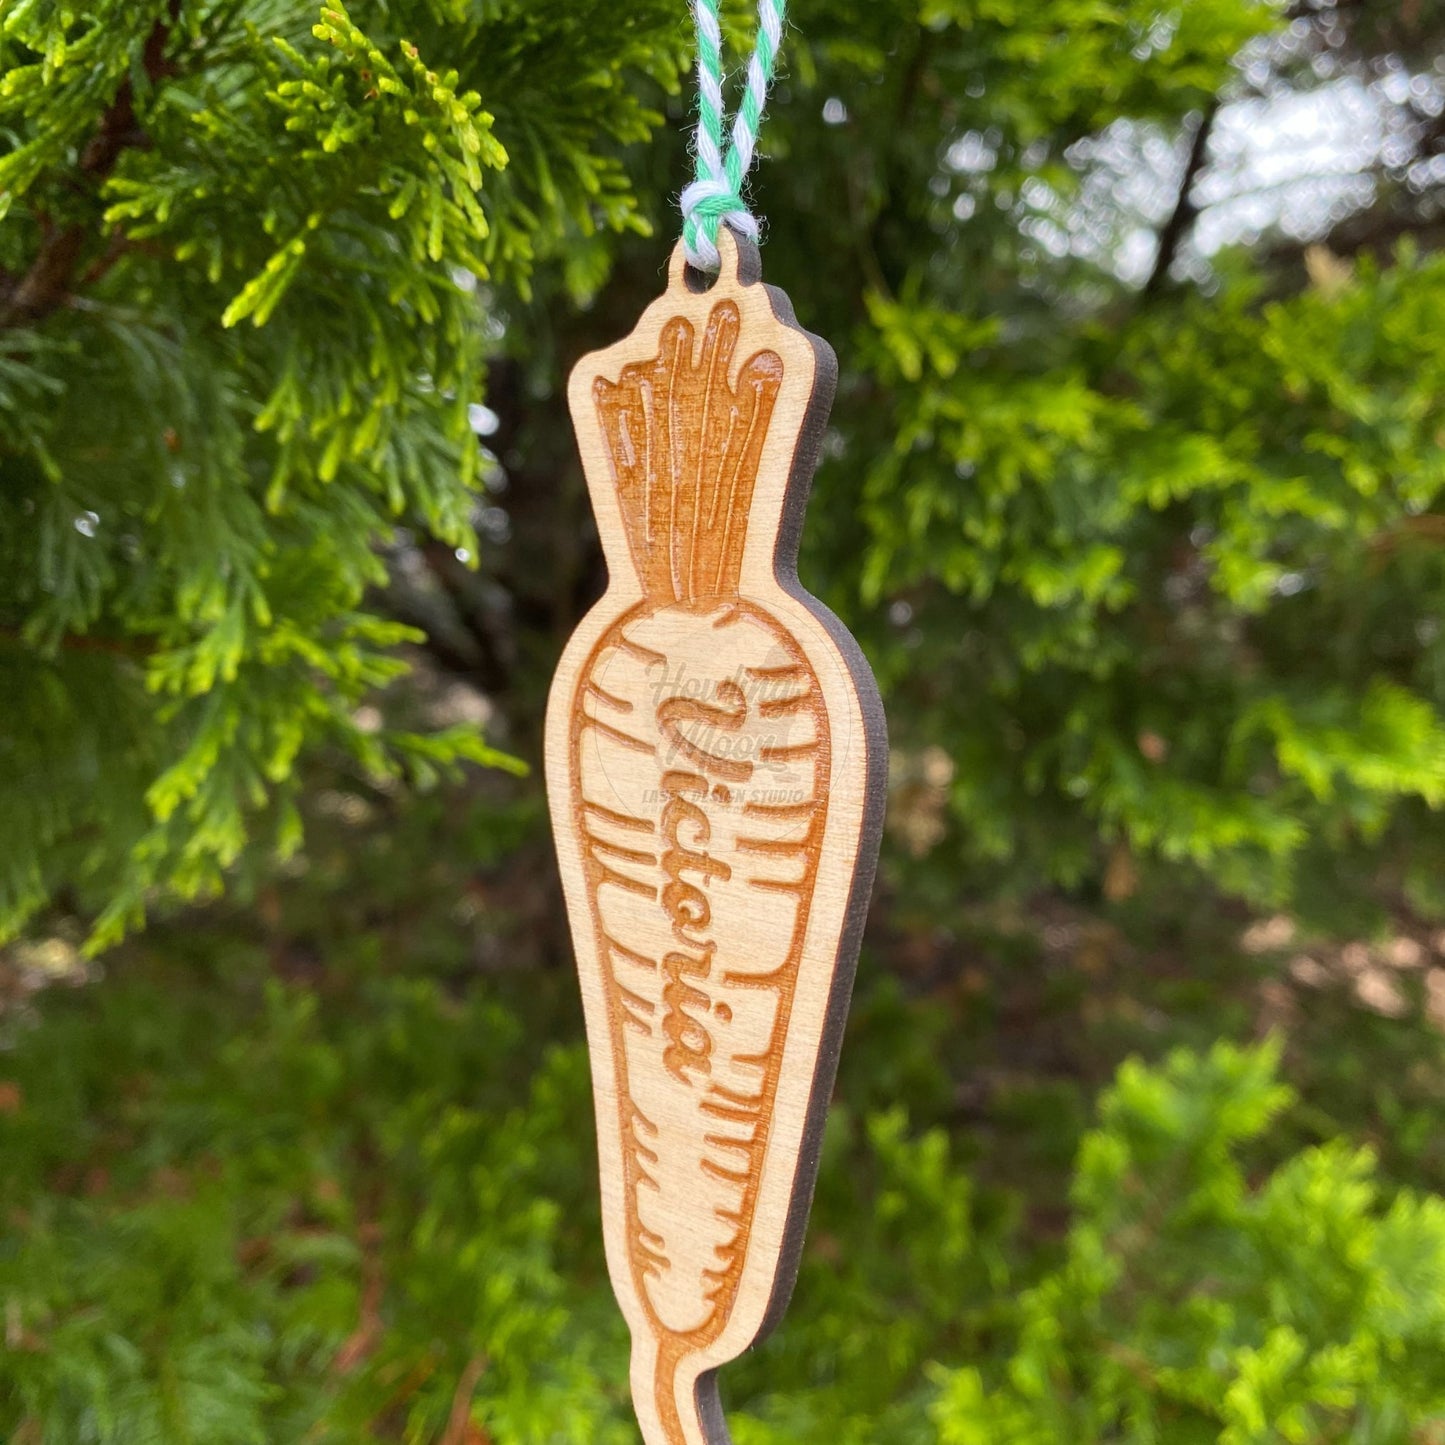 Personalized carrot ornament from Howling Moon Laser Design in Virginia USA.